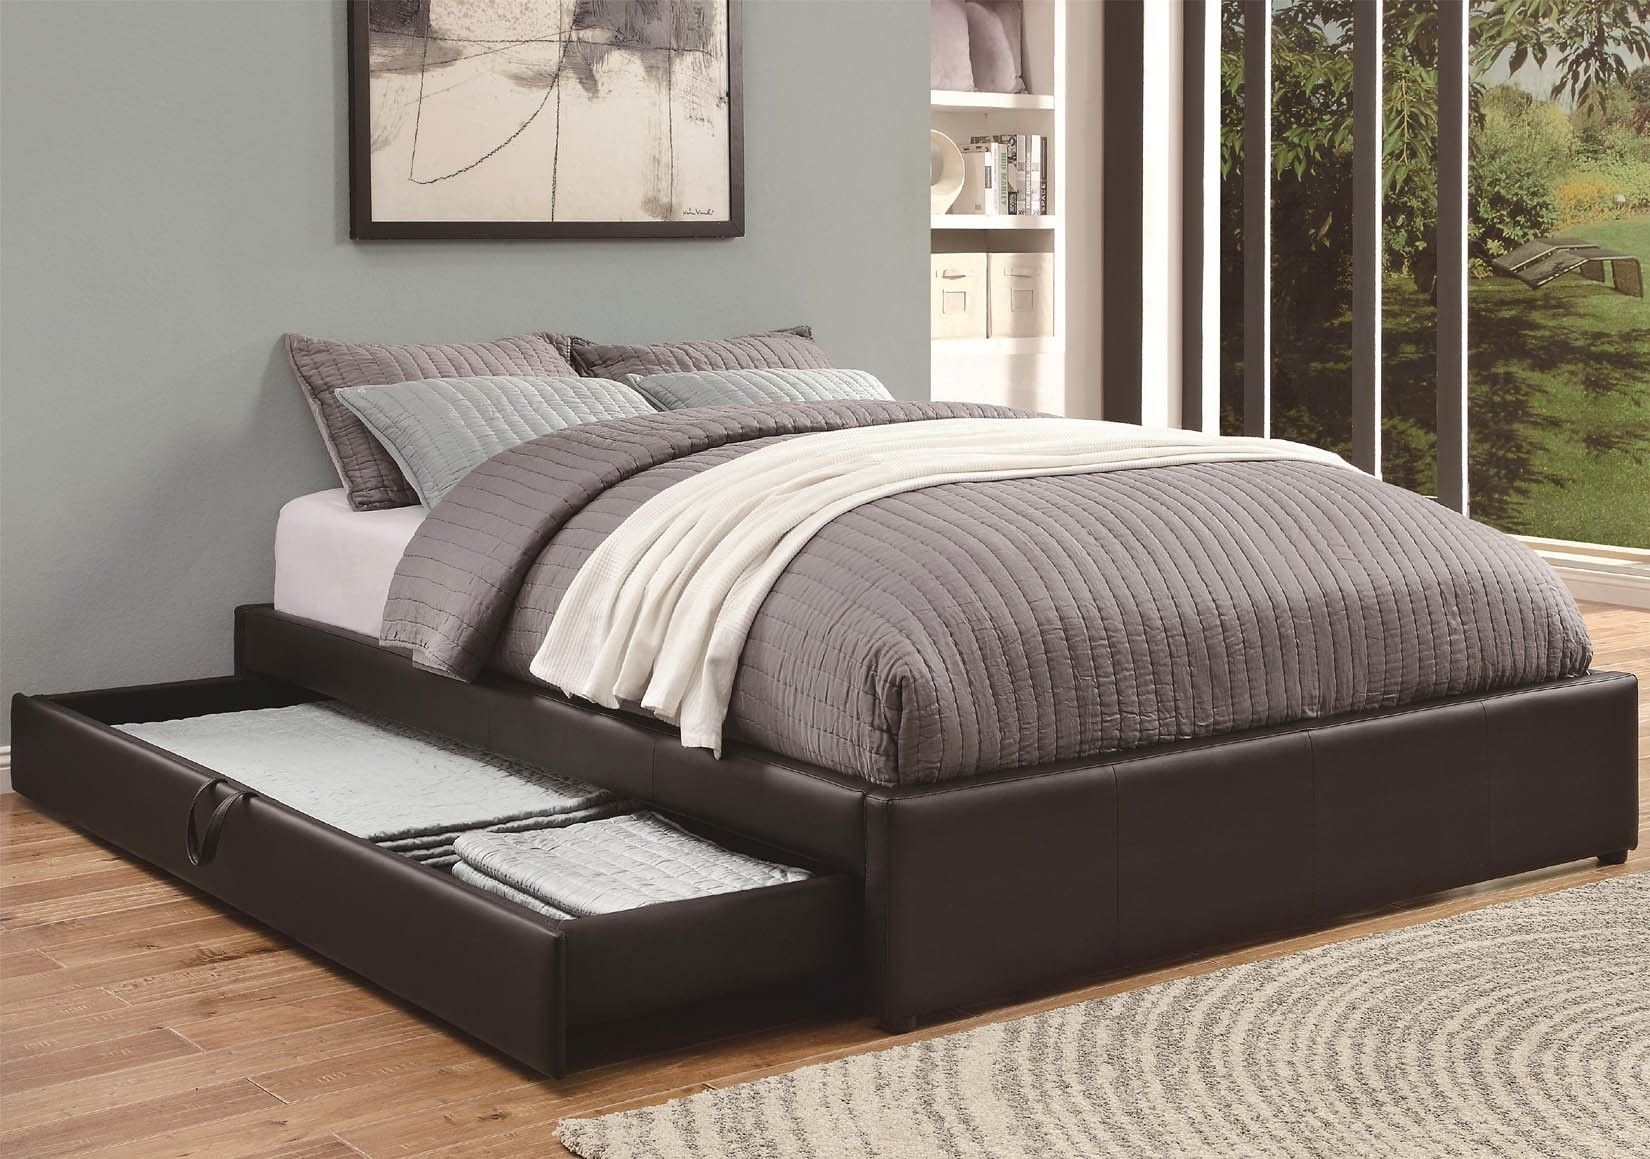 Coaster upholstered beds queen storage bed with black leather like